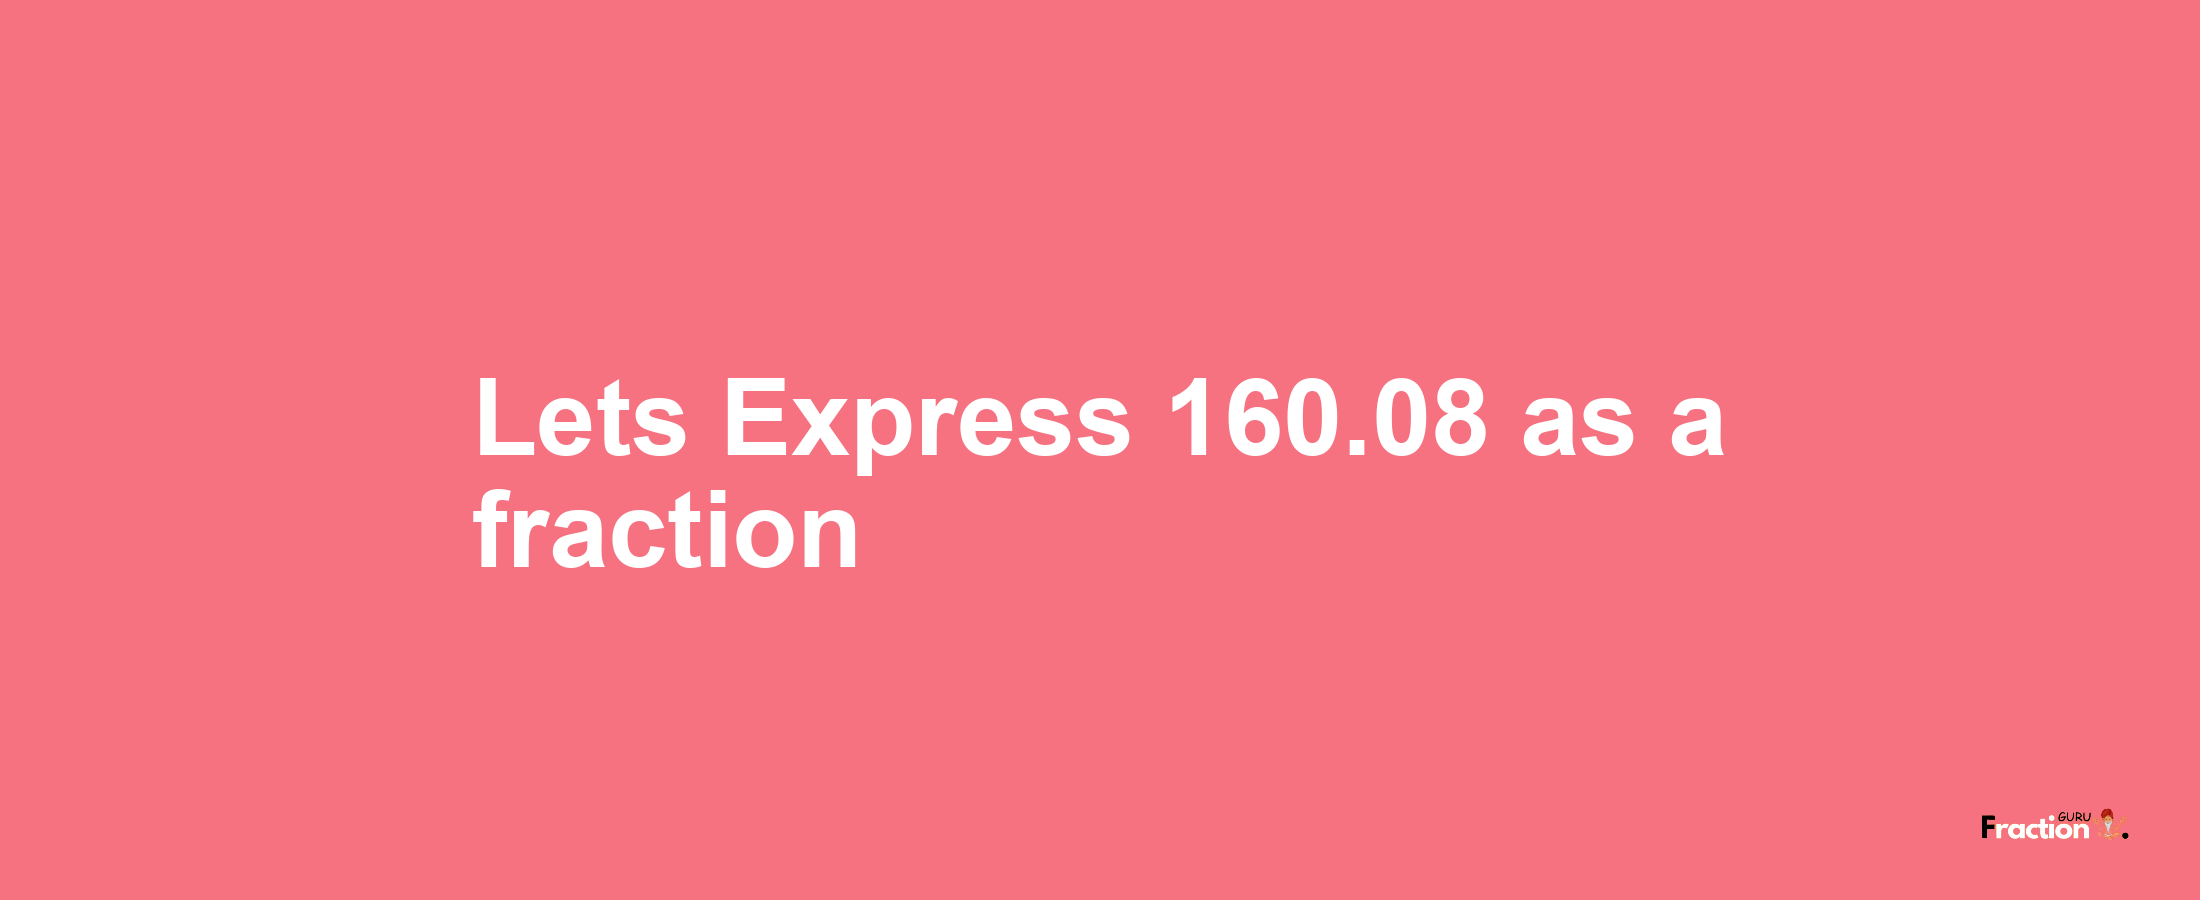 Lets Express 160.08 as afraction